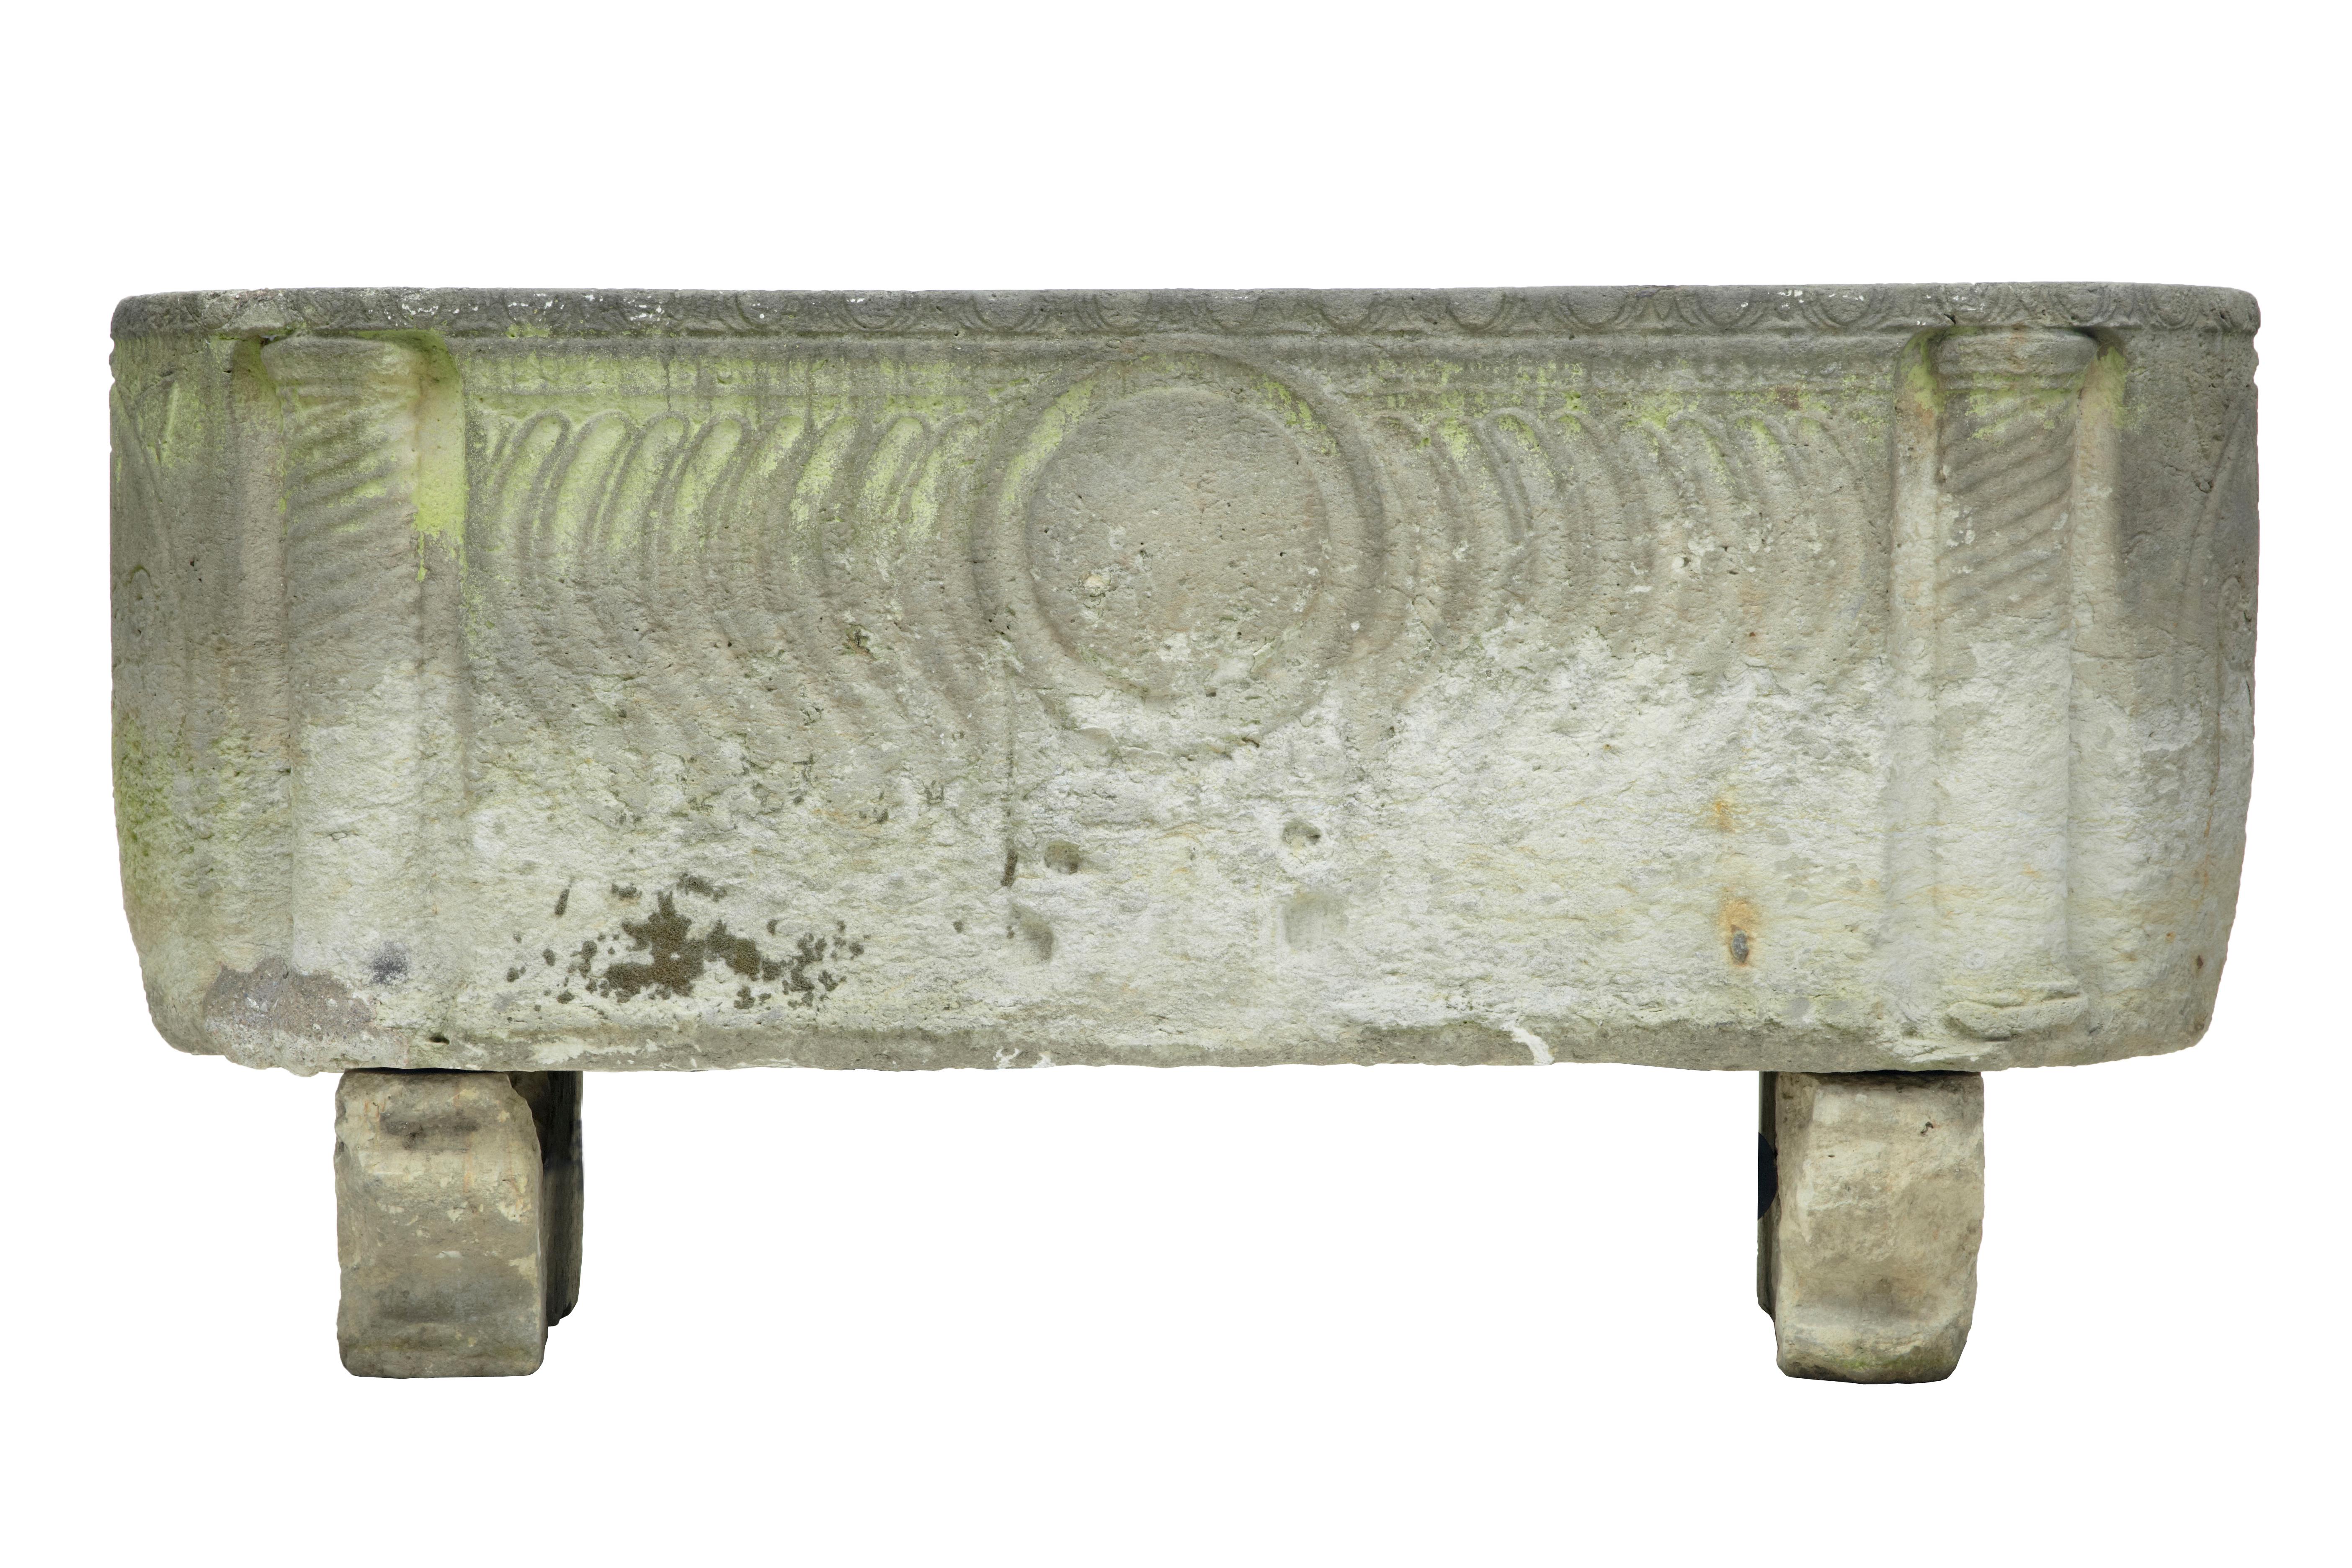 A stunning Anglo Roman sarcophagus in limestone, sitting on sledge feet and having curved strigilated side carvings with warrior shield and two crossed arrow symbols at each end, circa 250 AD. This unique piece was discovered in a Copenhagen garden.